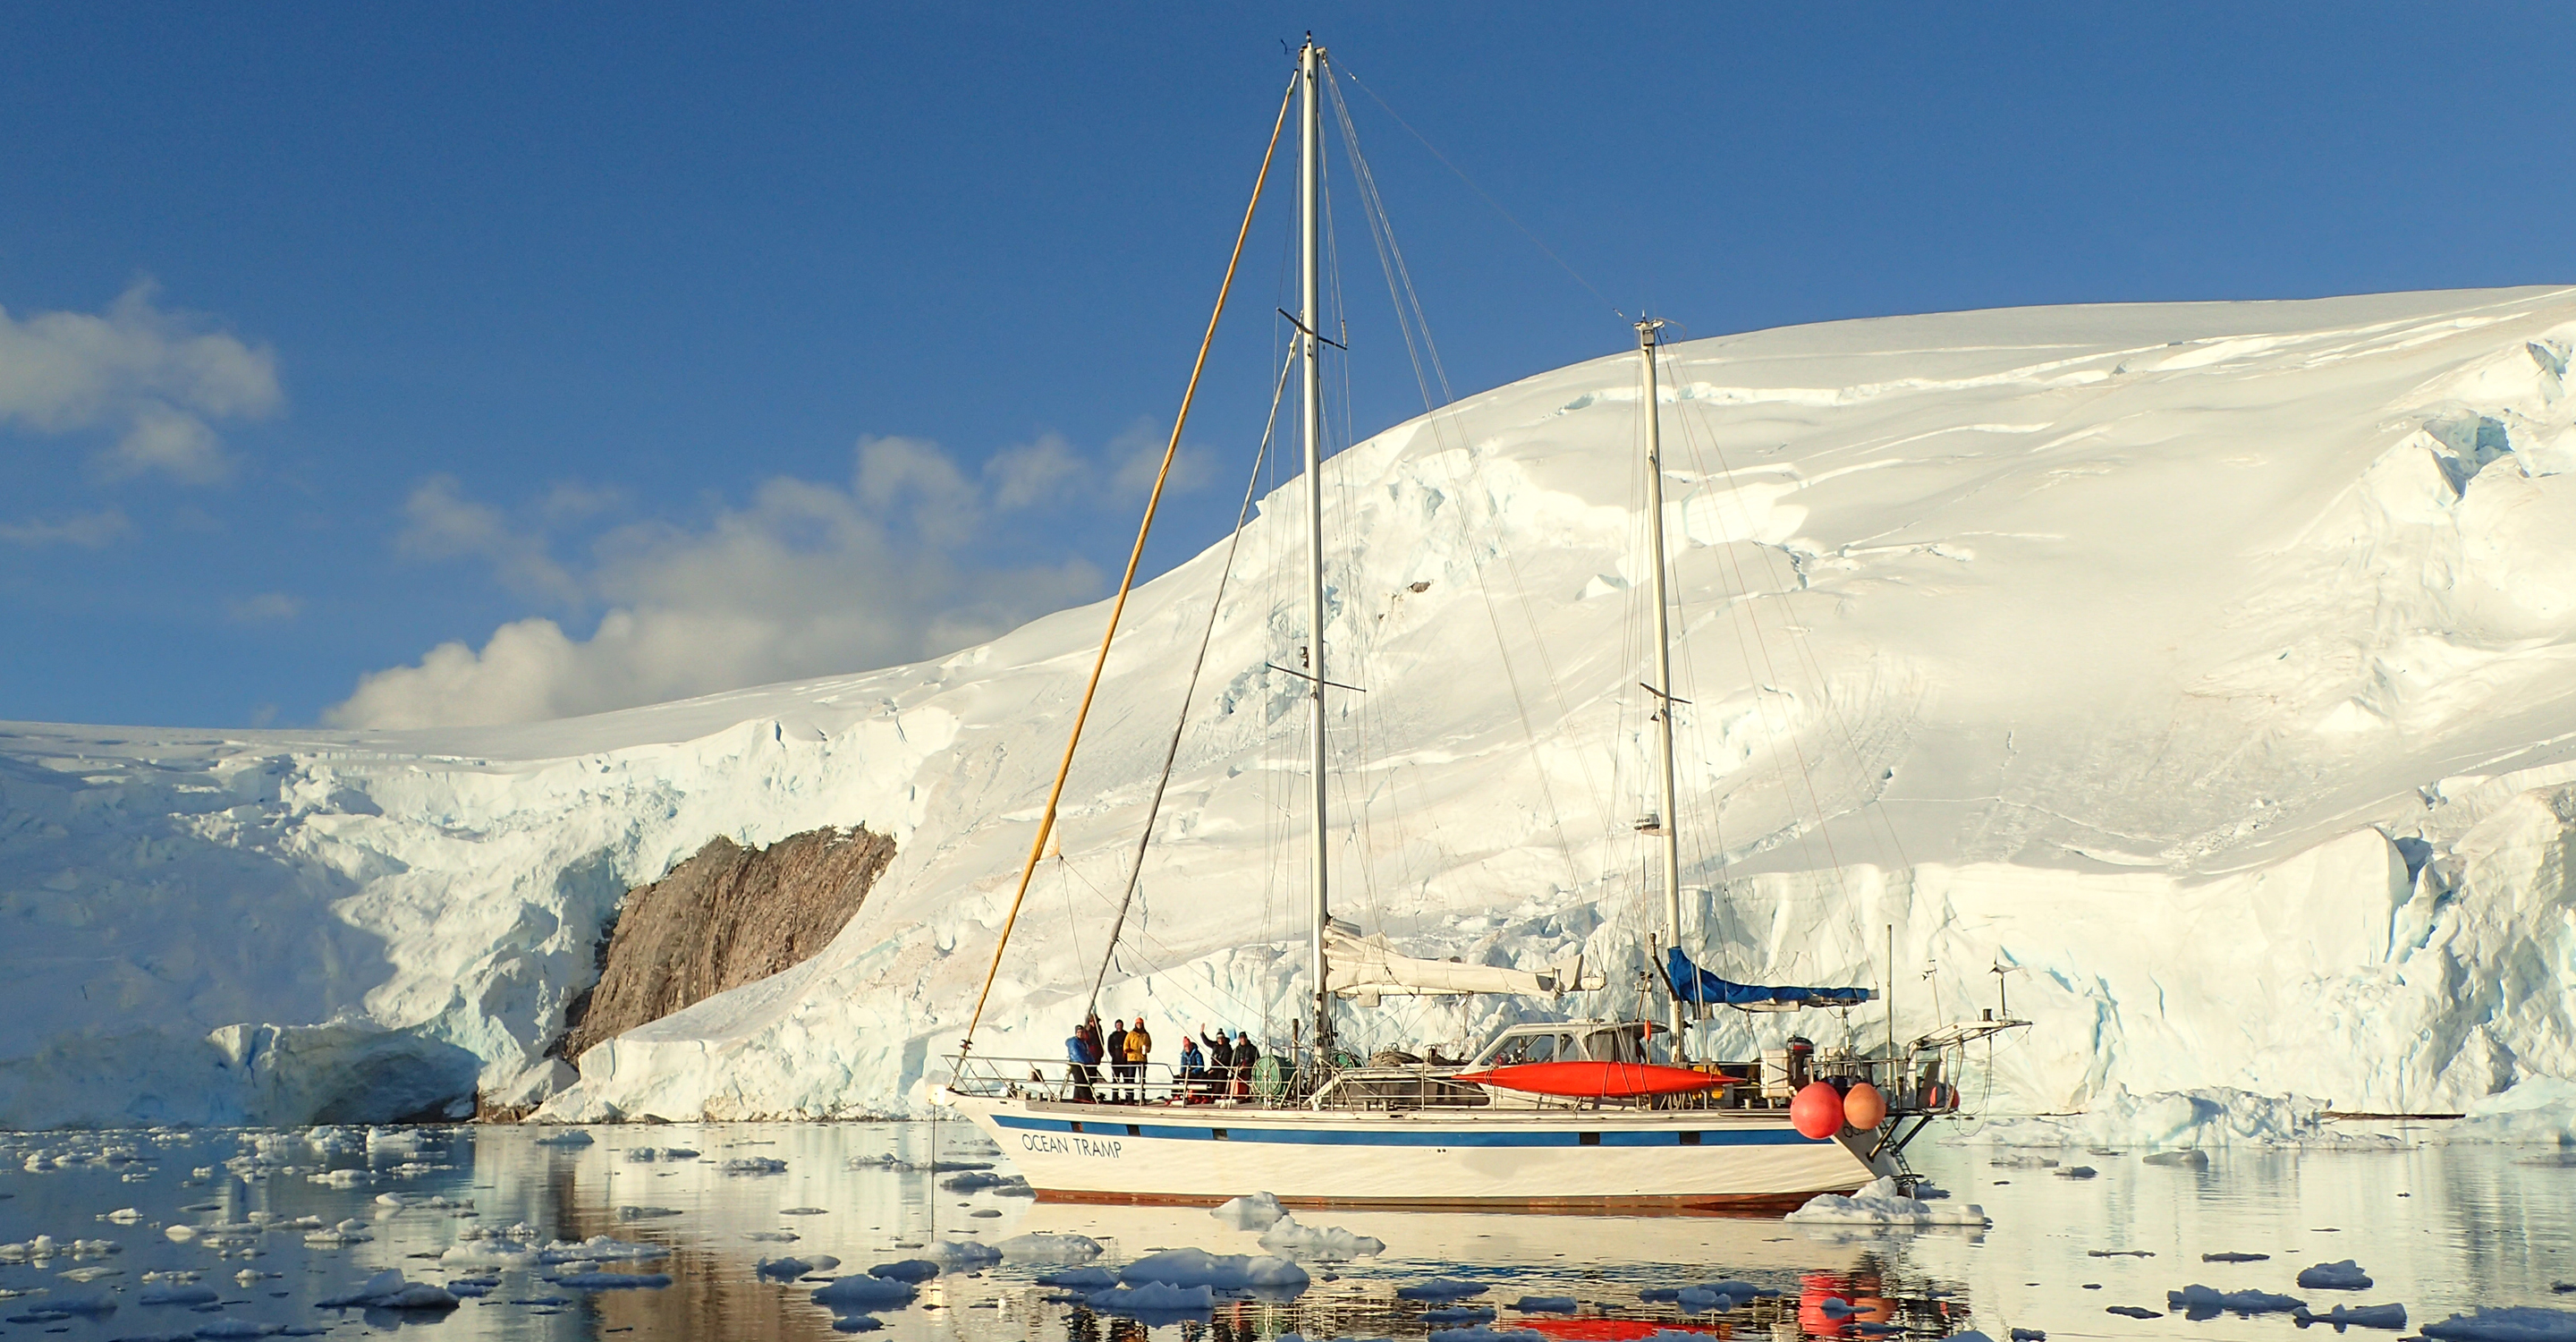 Travelers wave from the bow of the Ocean Tramp in the waters off of Antarctica